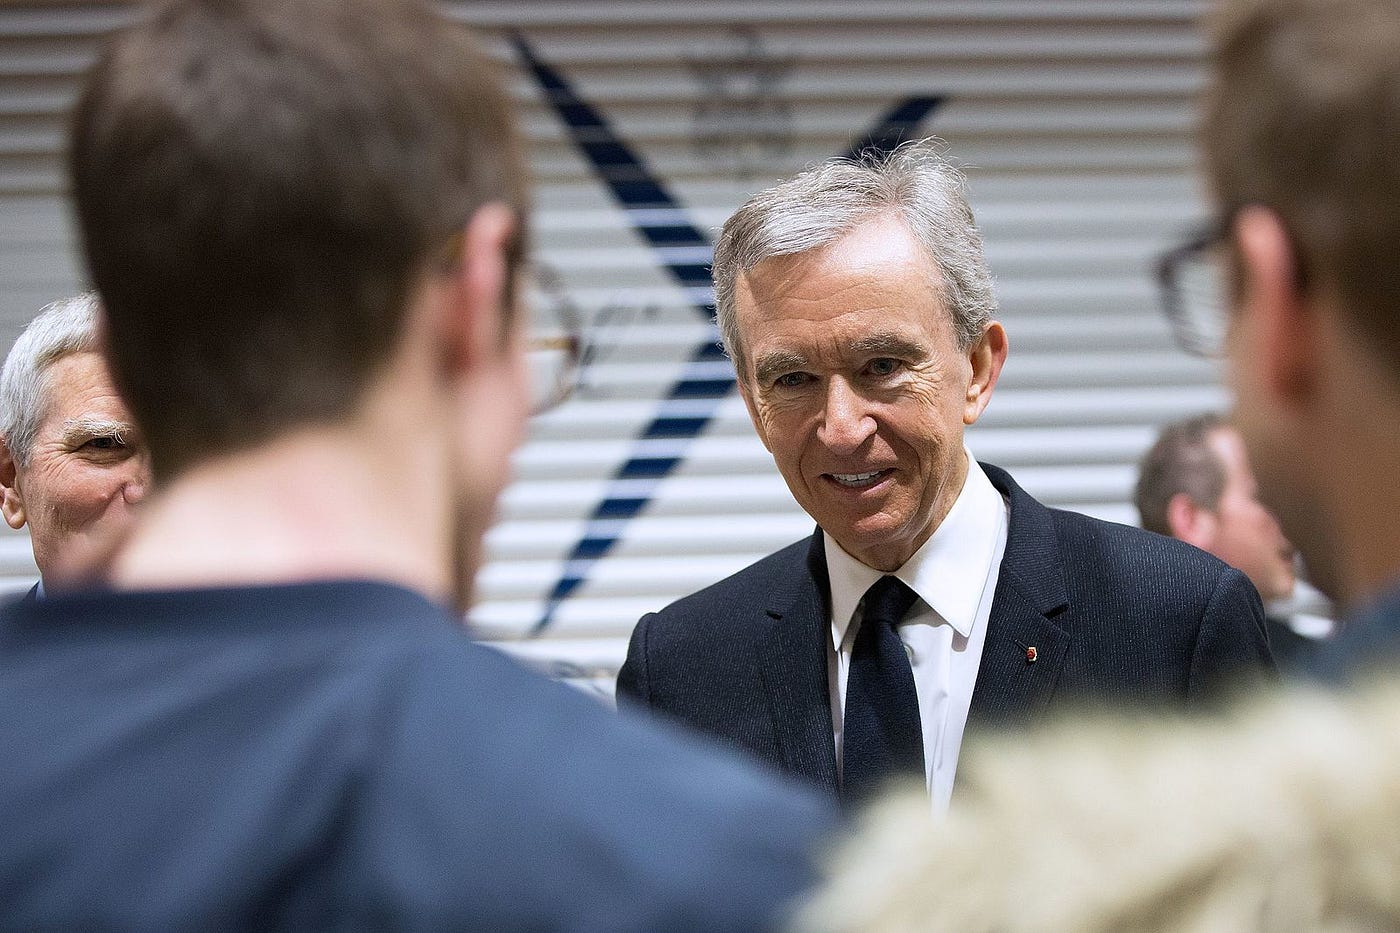 Bernard Arnault Business List: What Does The Second Richest Person Own?